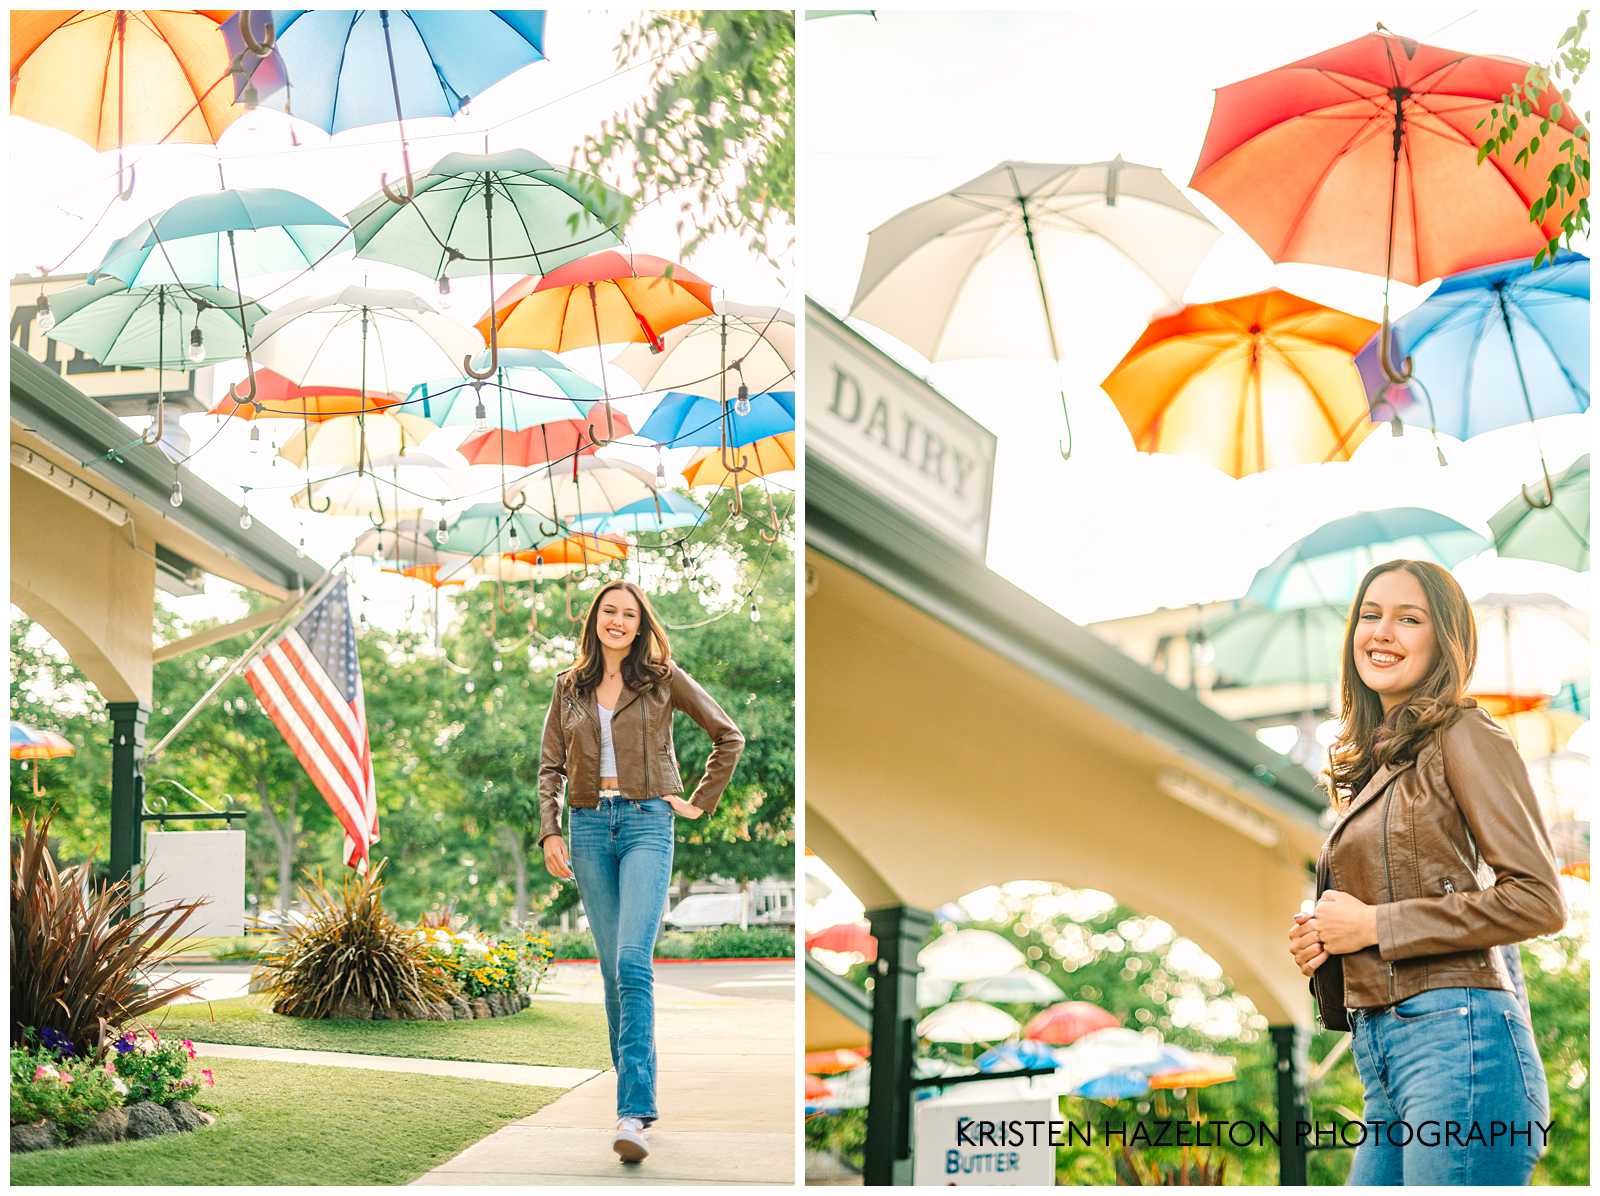 High school senior girl in brown leather jacket and blue jeans standing under colorful umbrellas